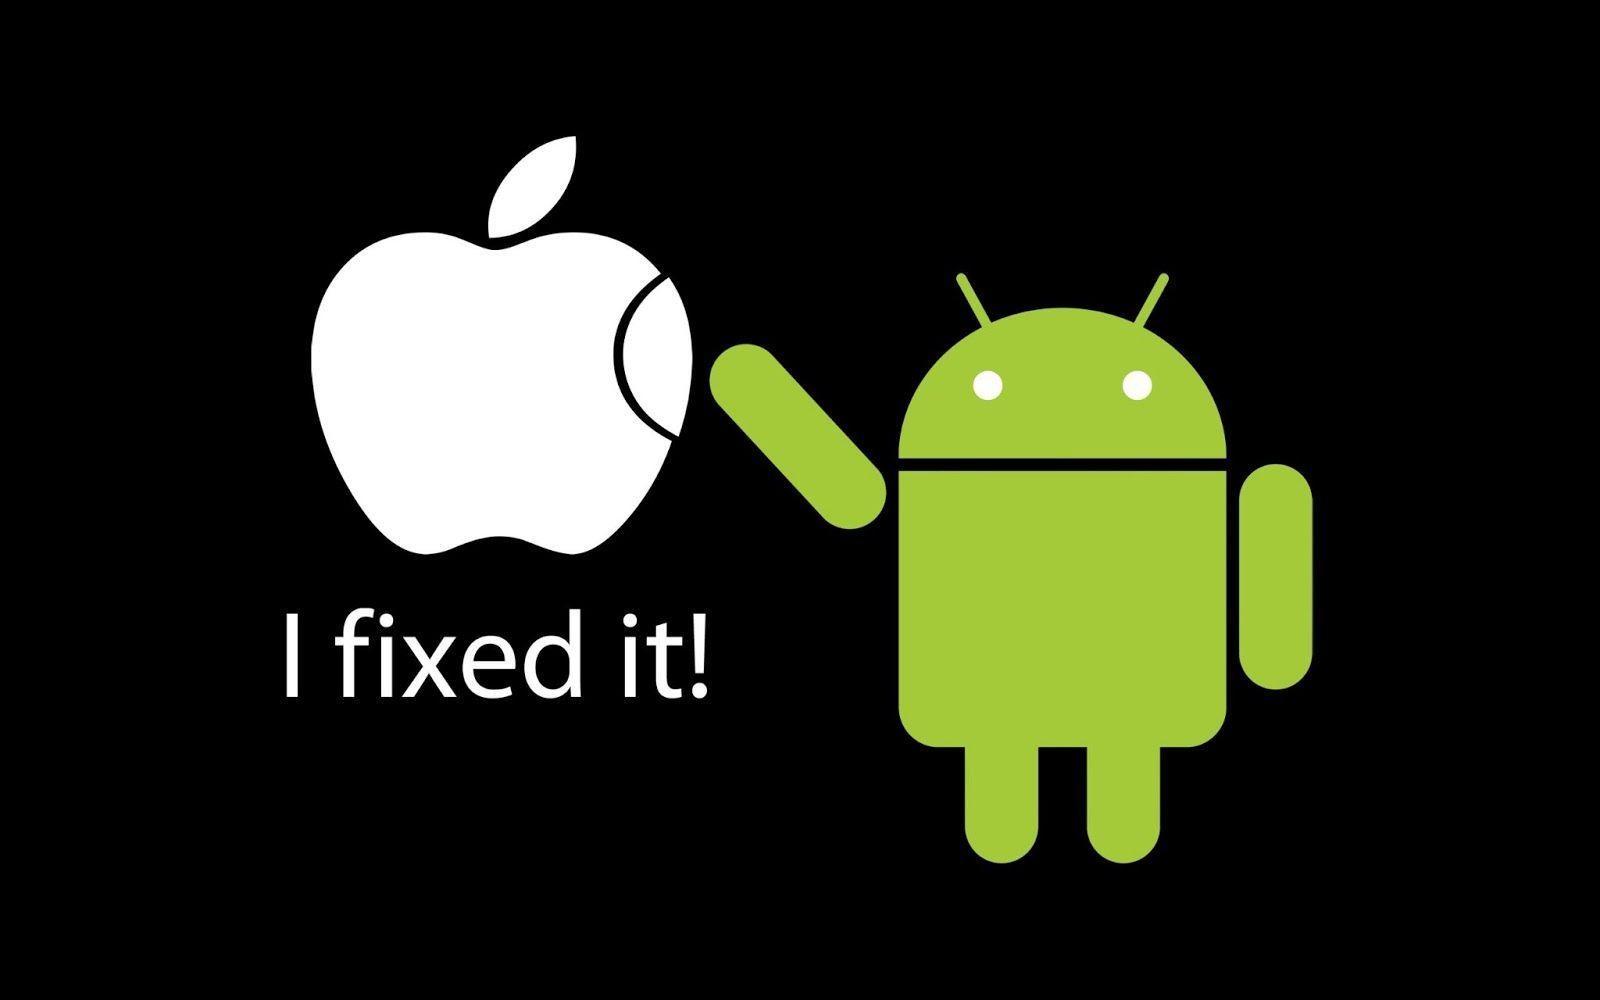 Funny Apple And Android Wallpaper Desktop #7732 Wallpaper ...